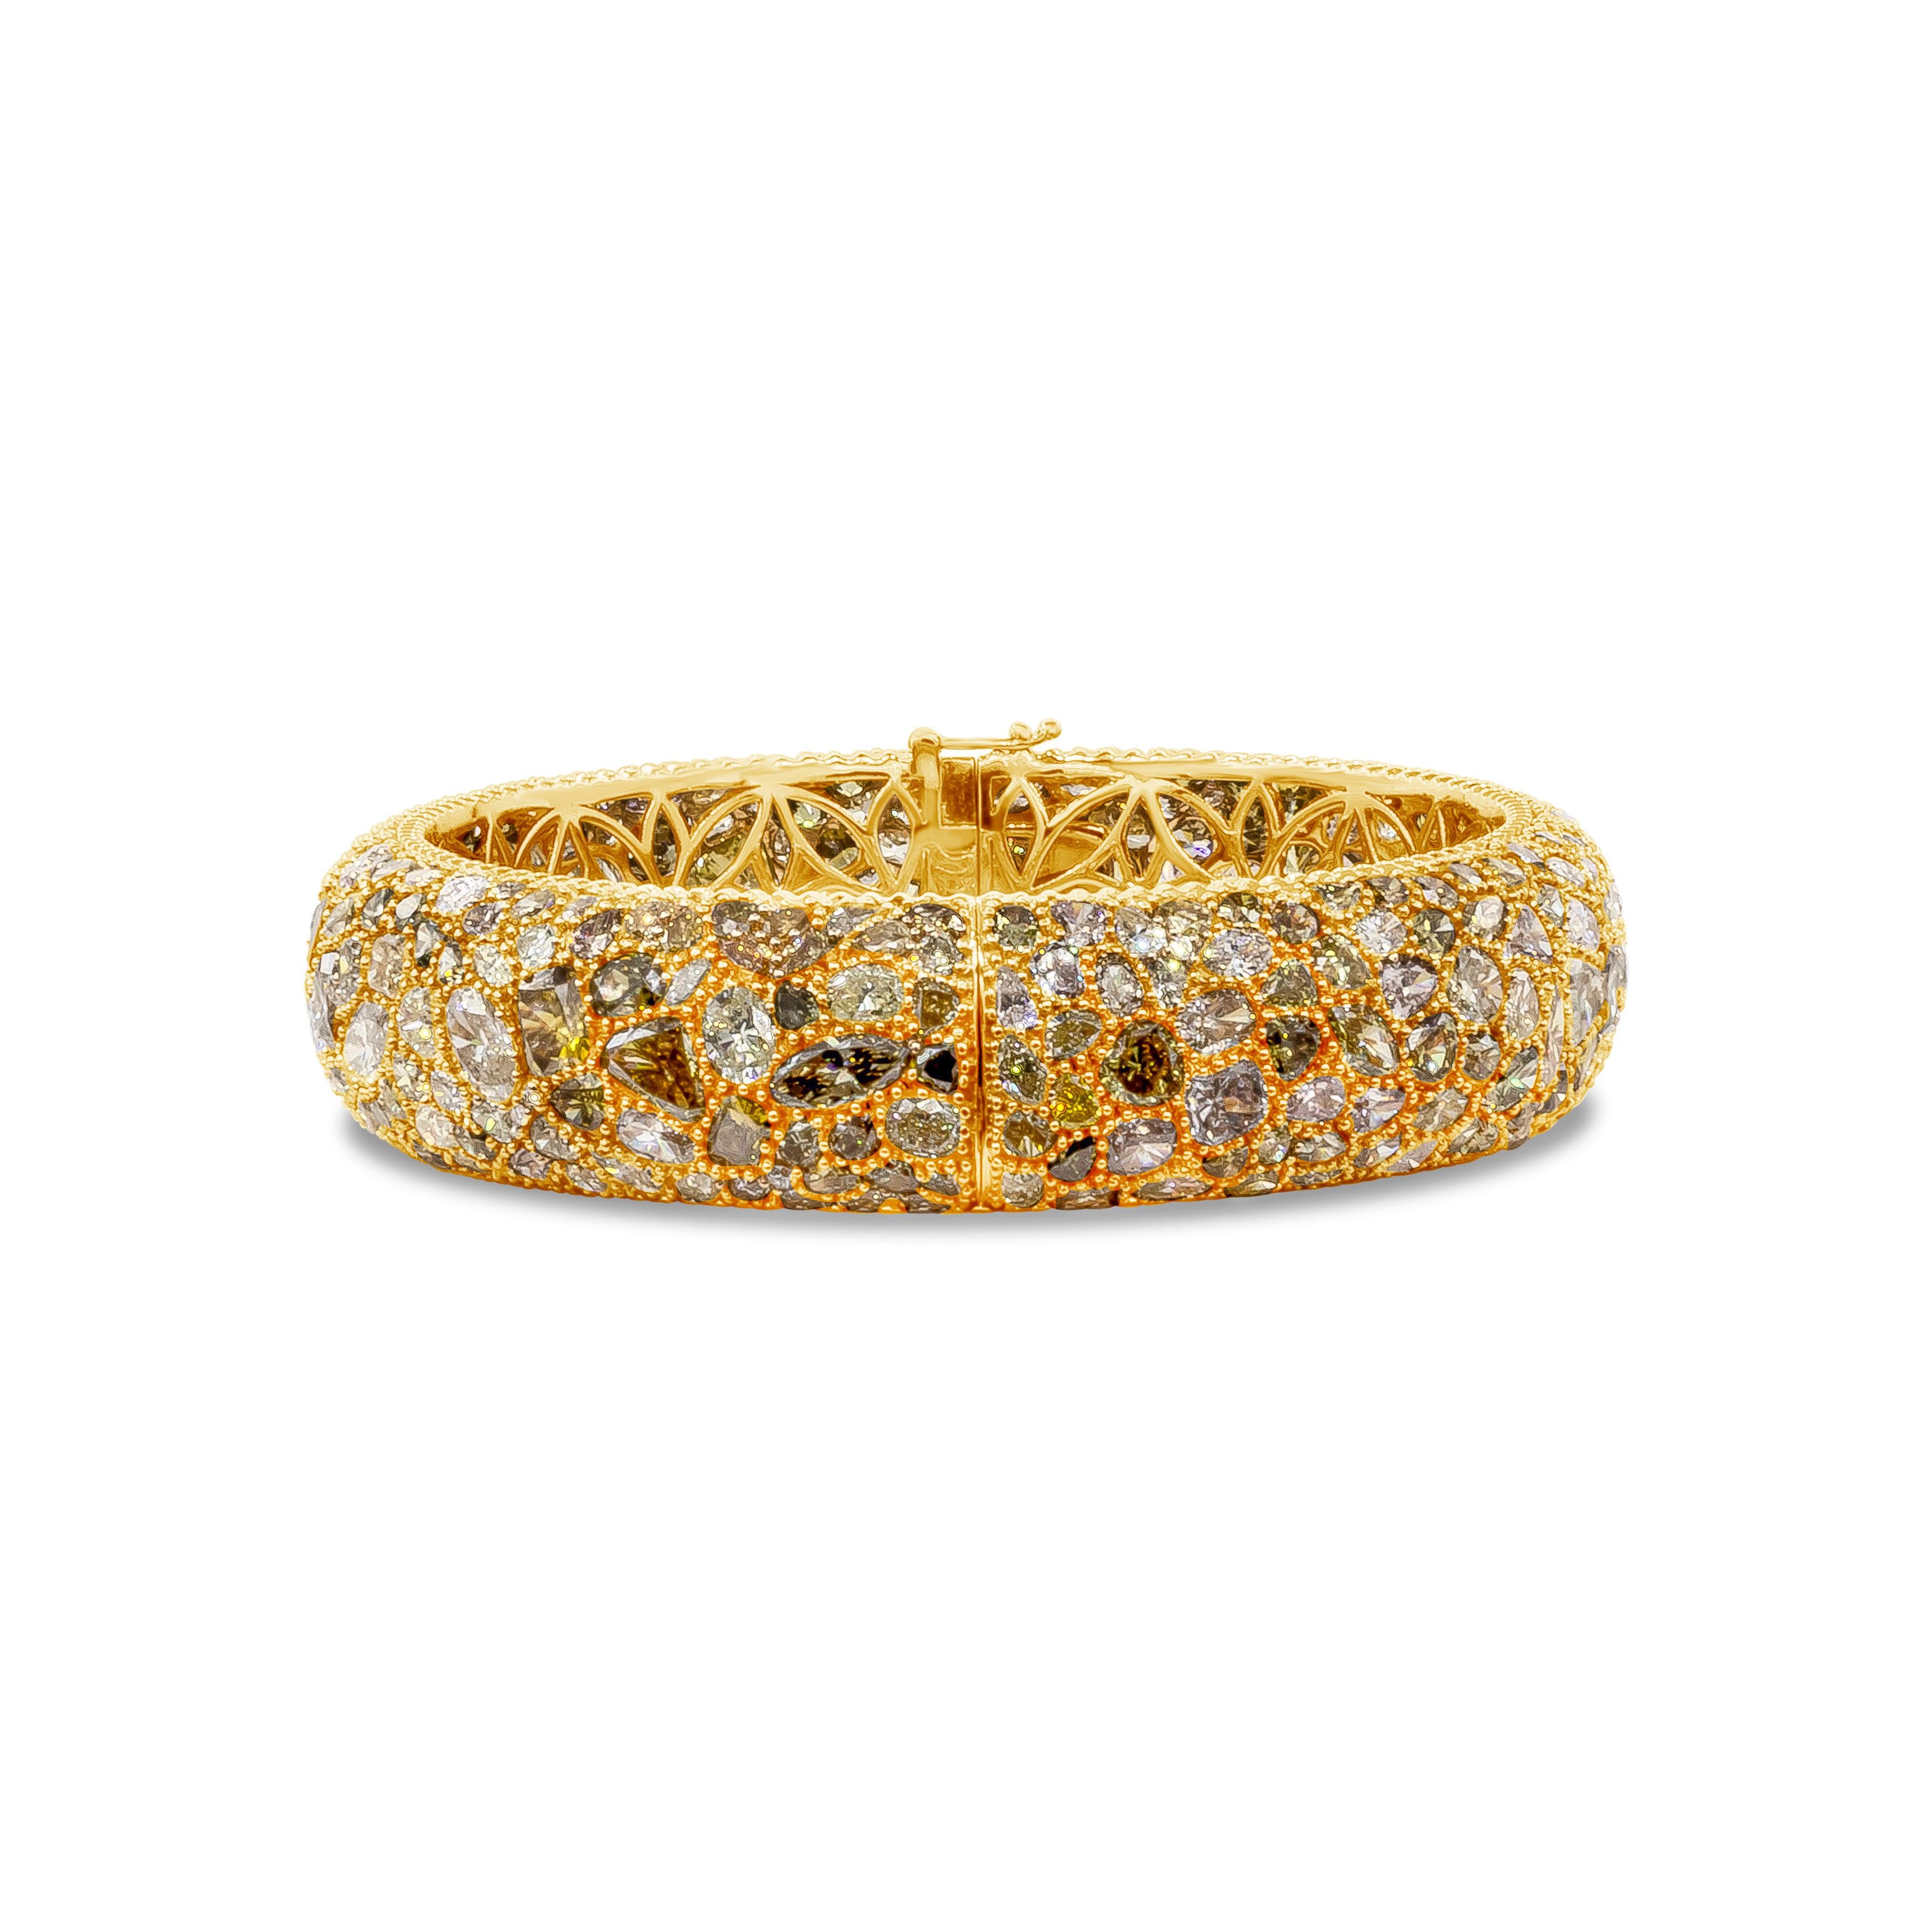 Elegant and color rich domed bangle bracelet showcasing perfectly matched 362 pieces of mixed cut fancy color diamonds, micro-pave on an 18k rose gold setting, weighing 49.12 carat total. Each diamond is uniquely cut to fit seamlessly and cohesively.